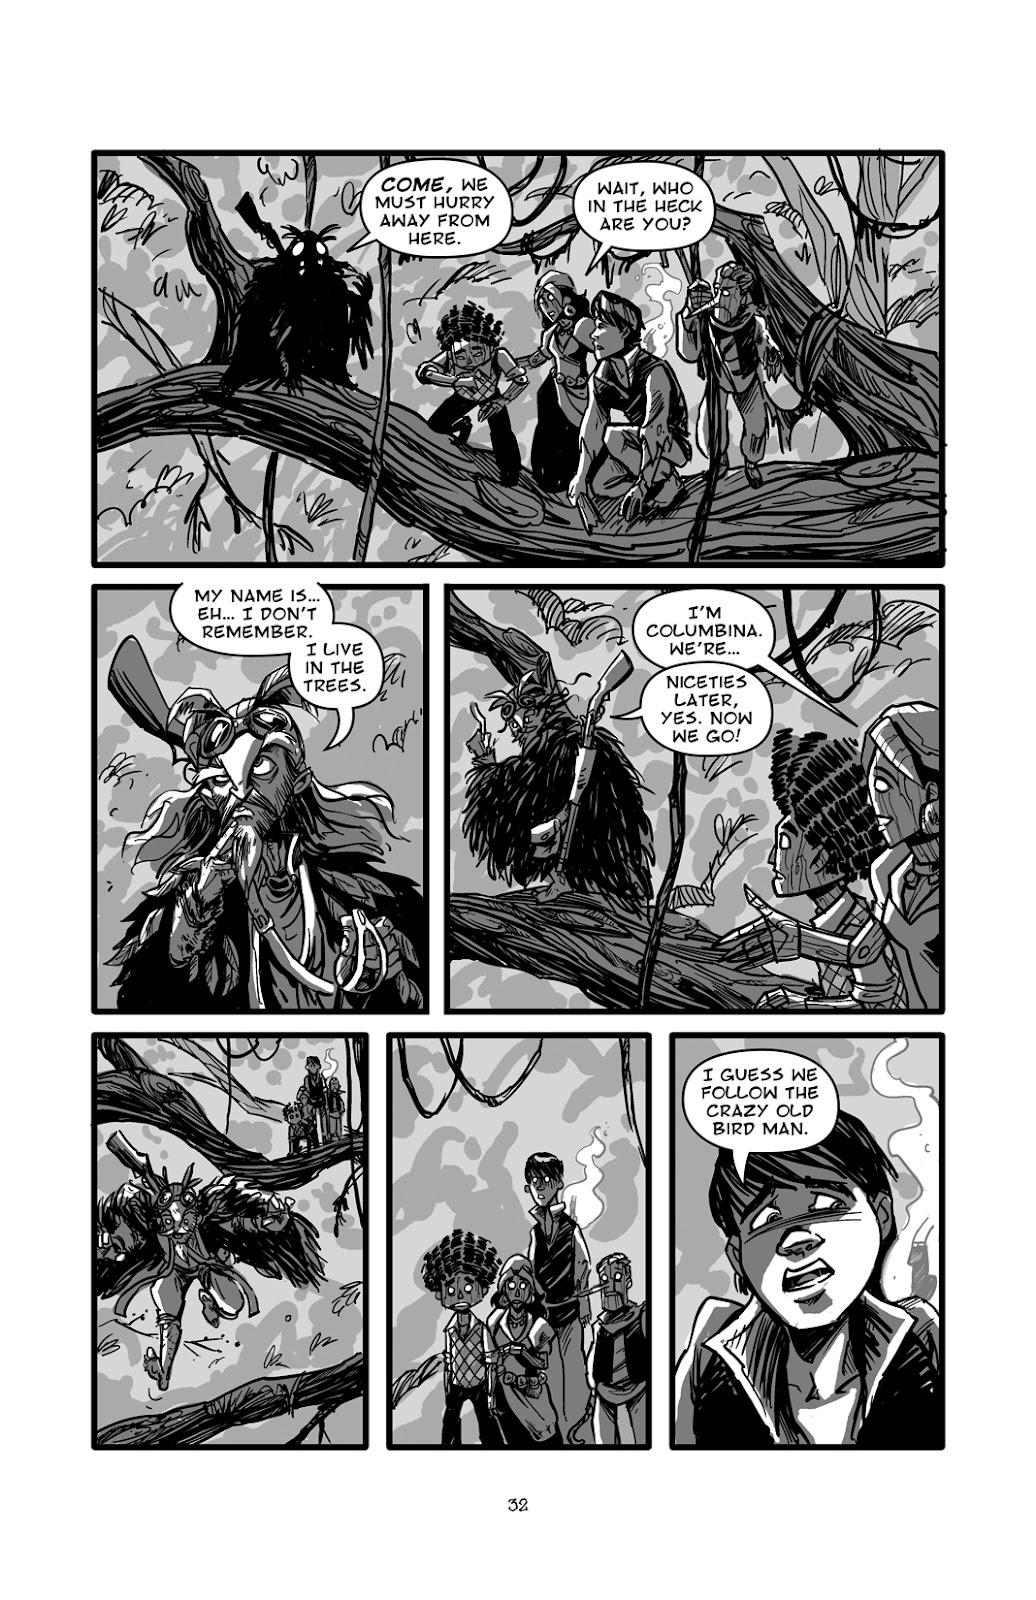 Pinocchio: Vampire Slayer - Of Wood and Blood issue 2 - Page 7